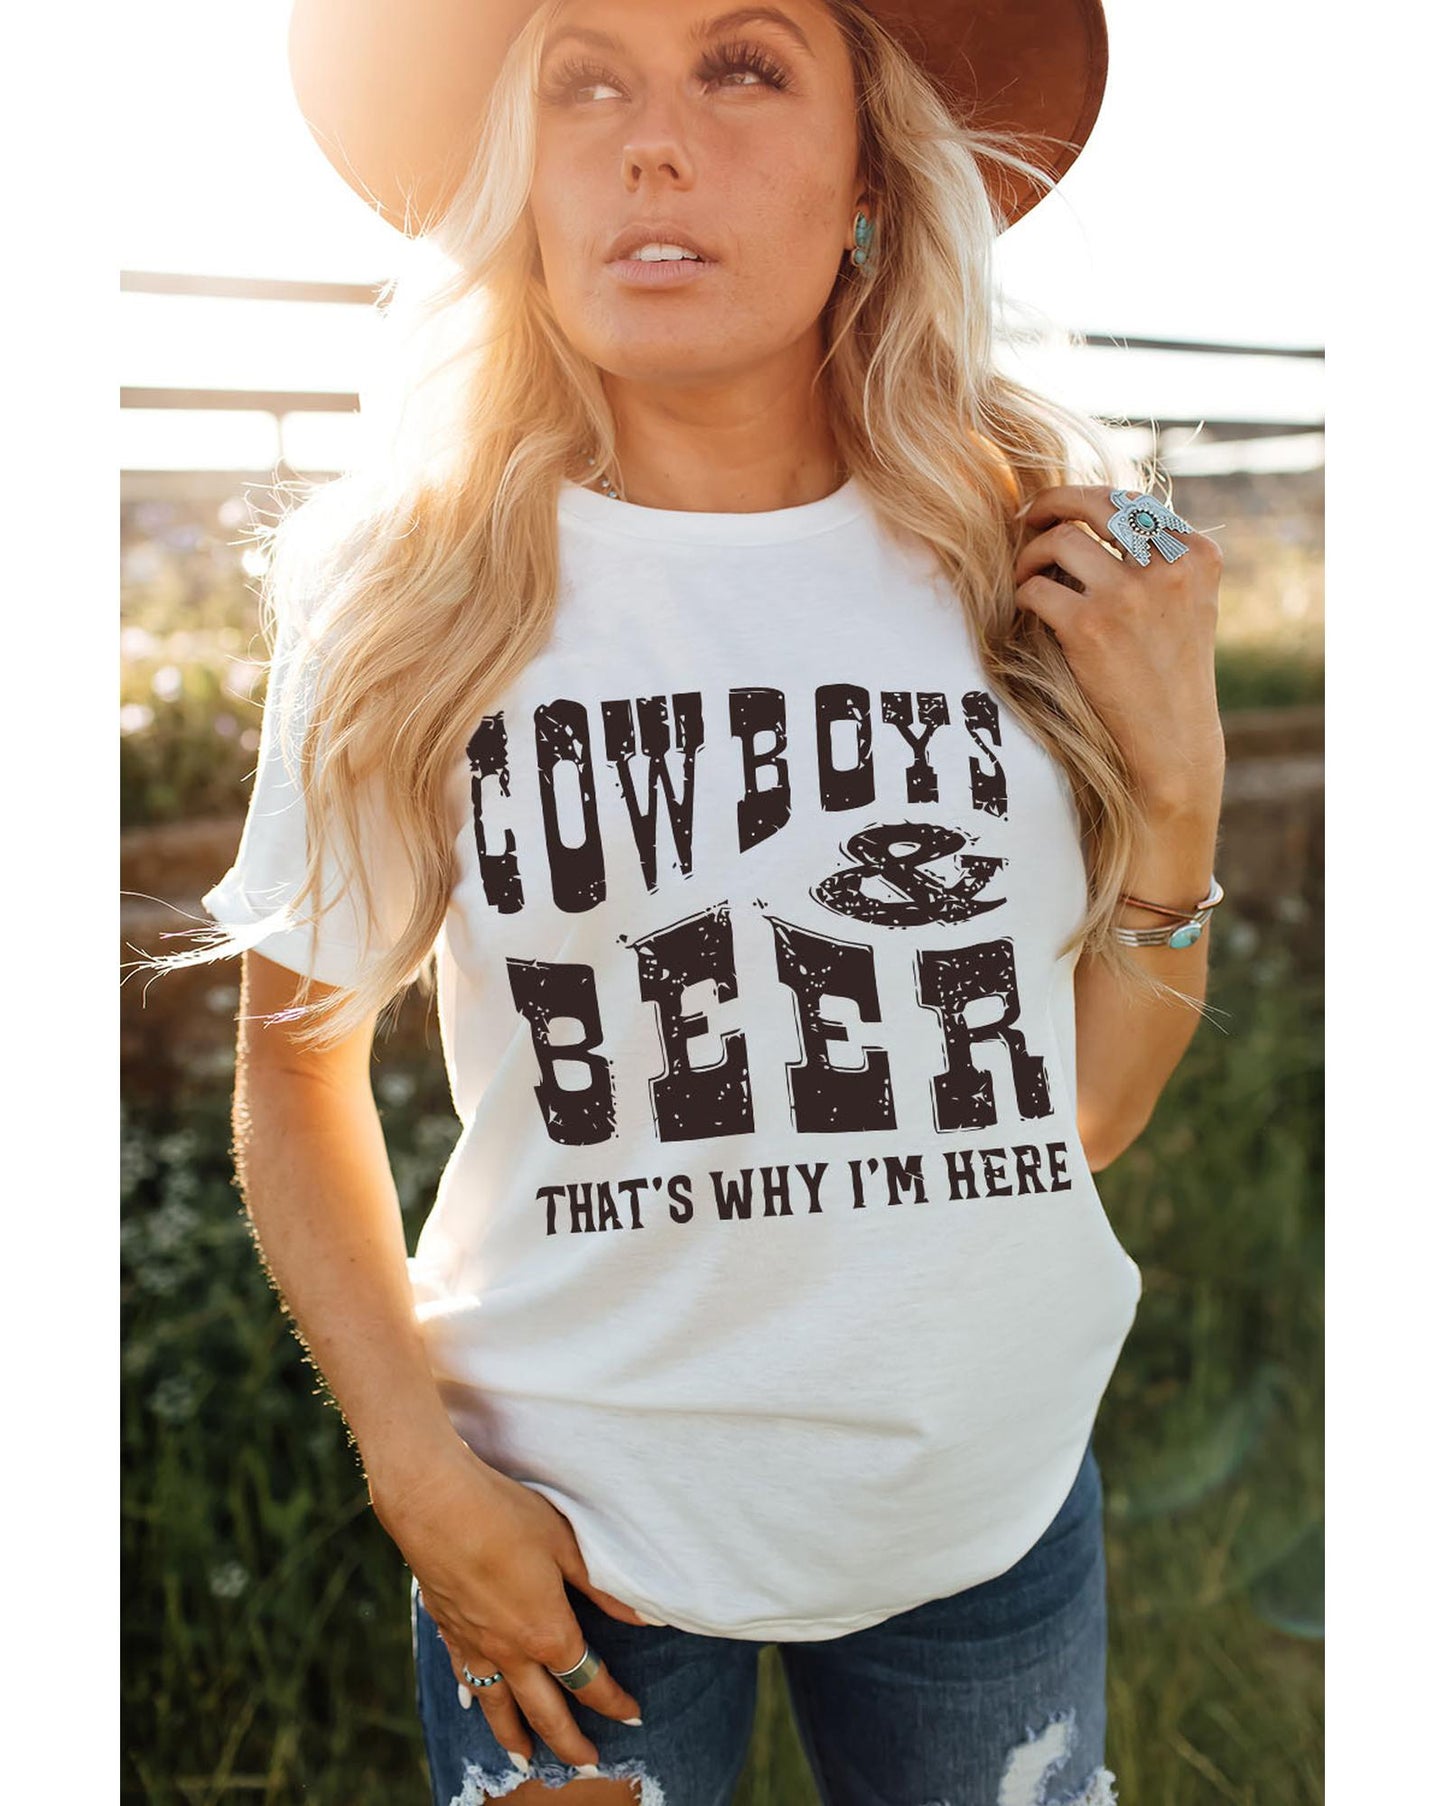 Azura Exchange COW BOYS & BEERS Letters Graphic T-shirt - S